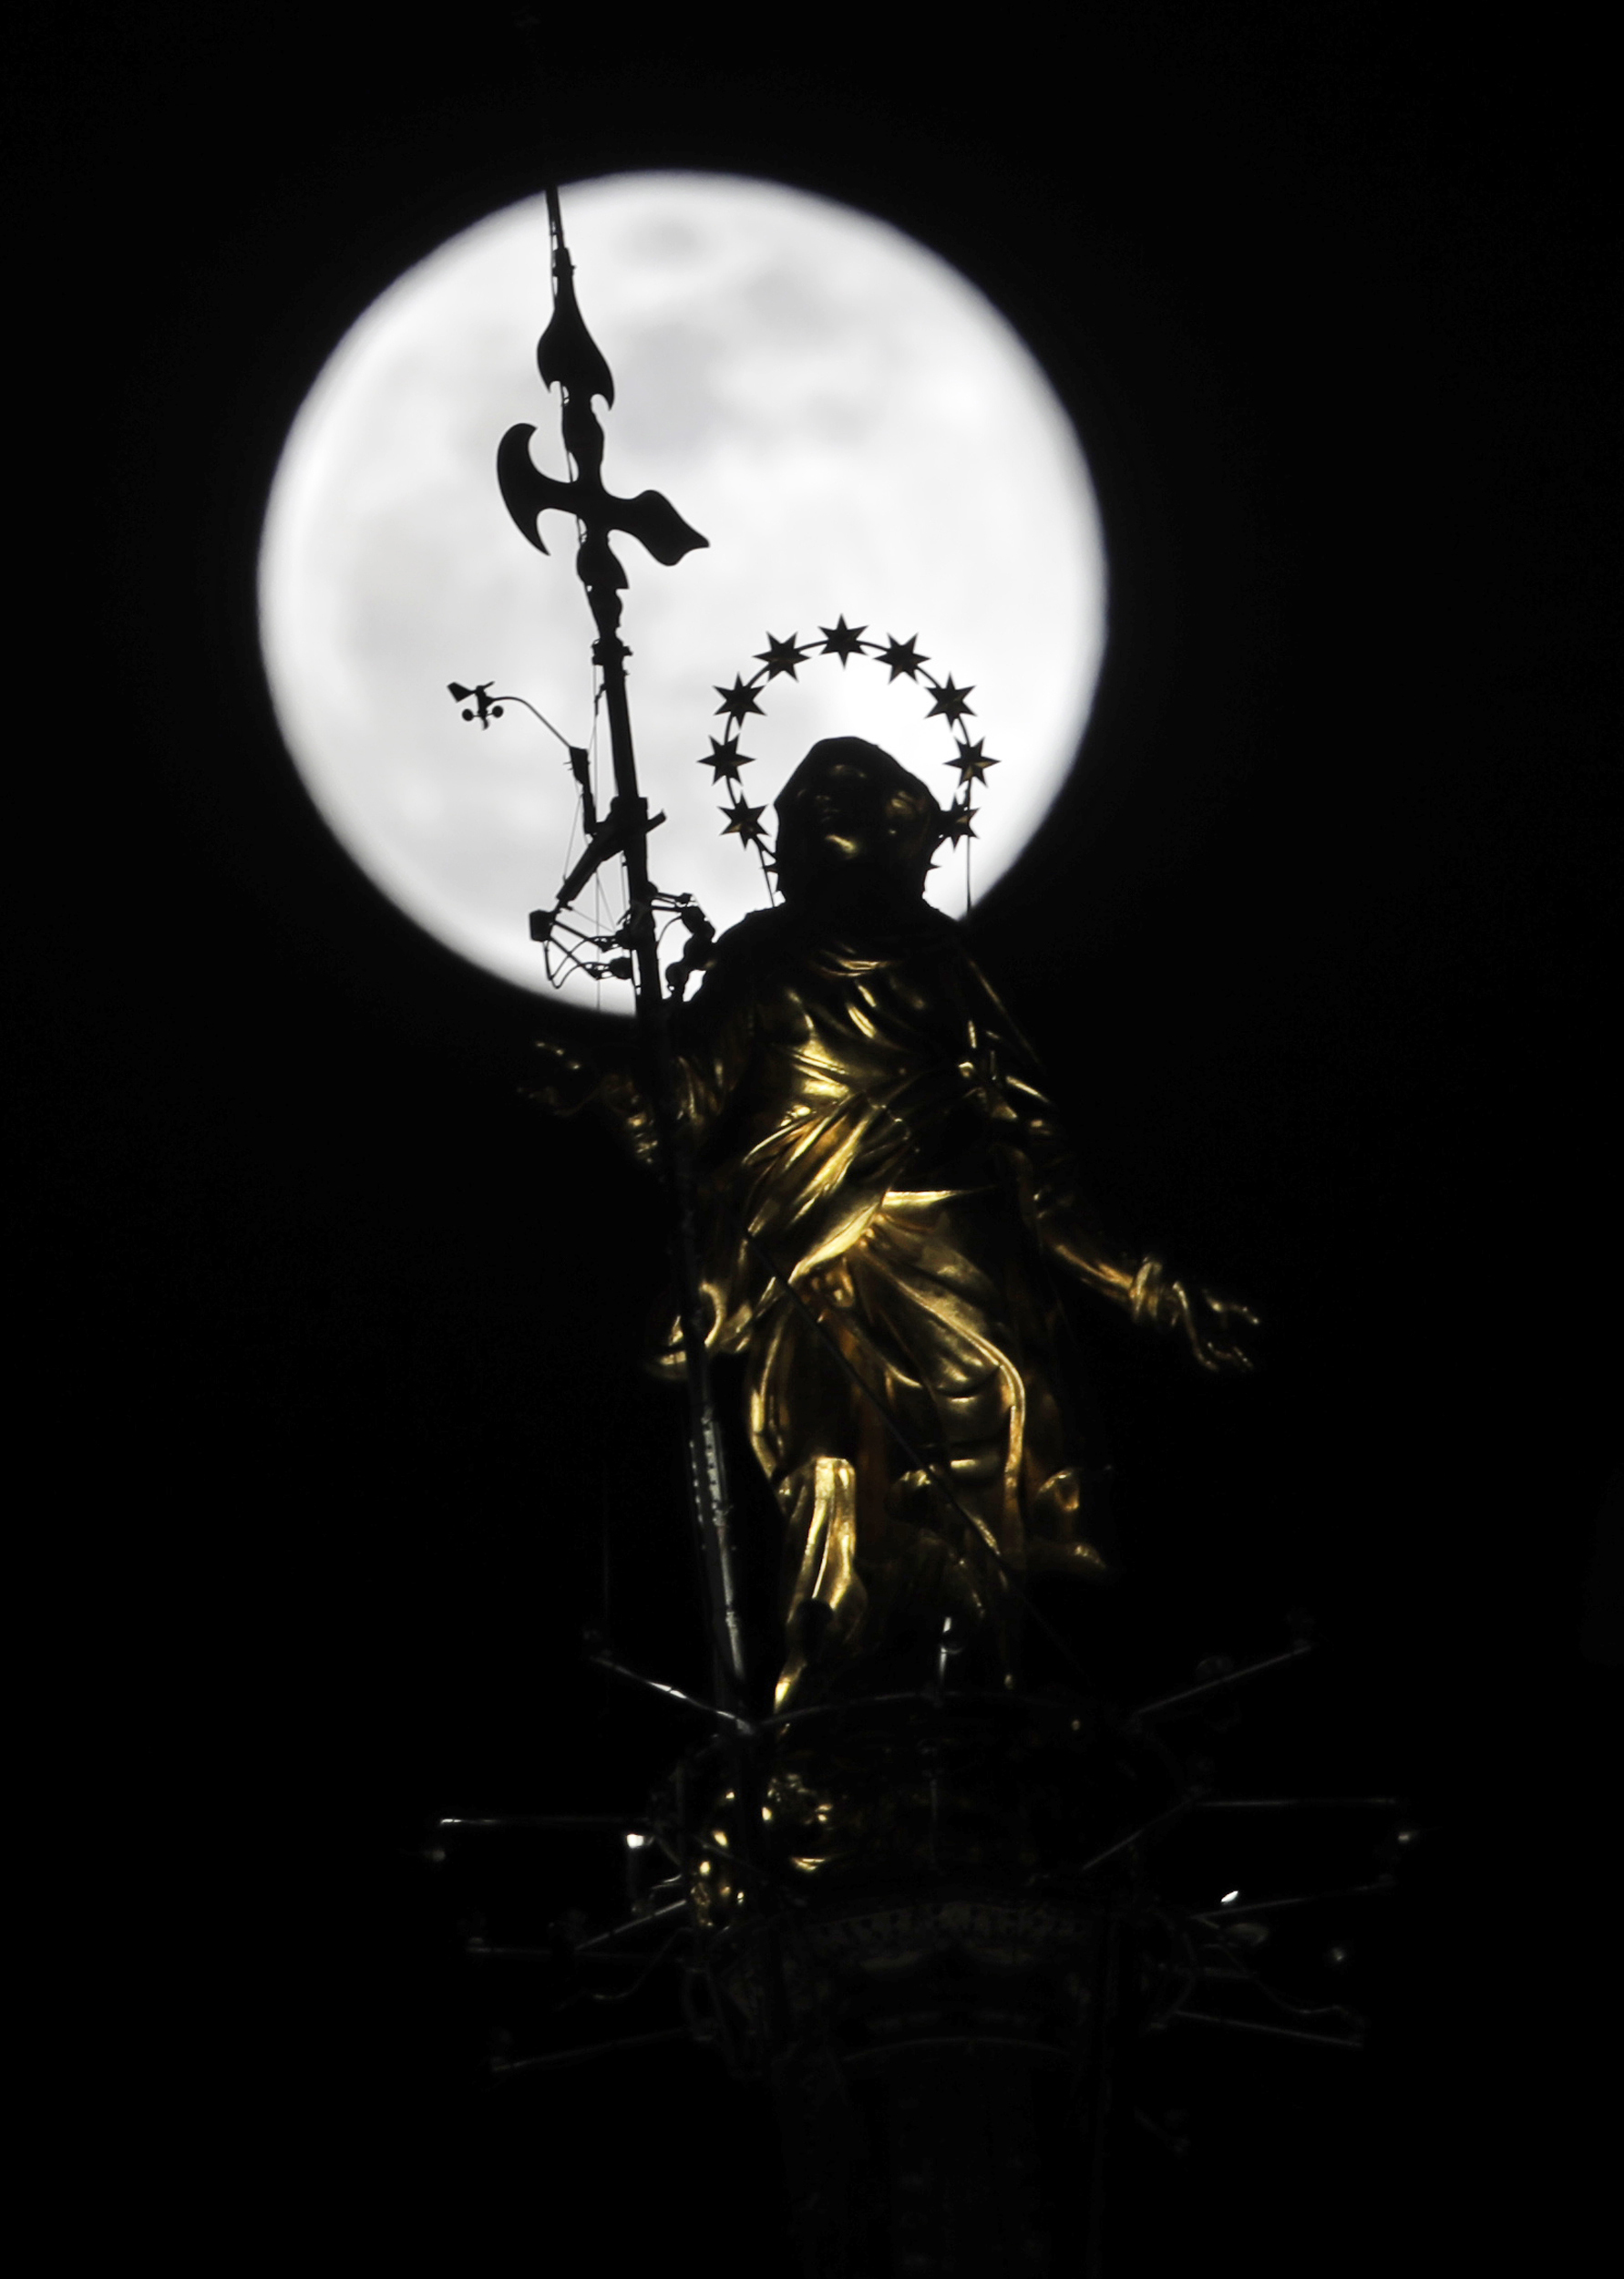 The supermoon rises behind a statue of the Virgin Mary in Milan